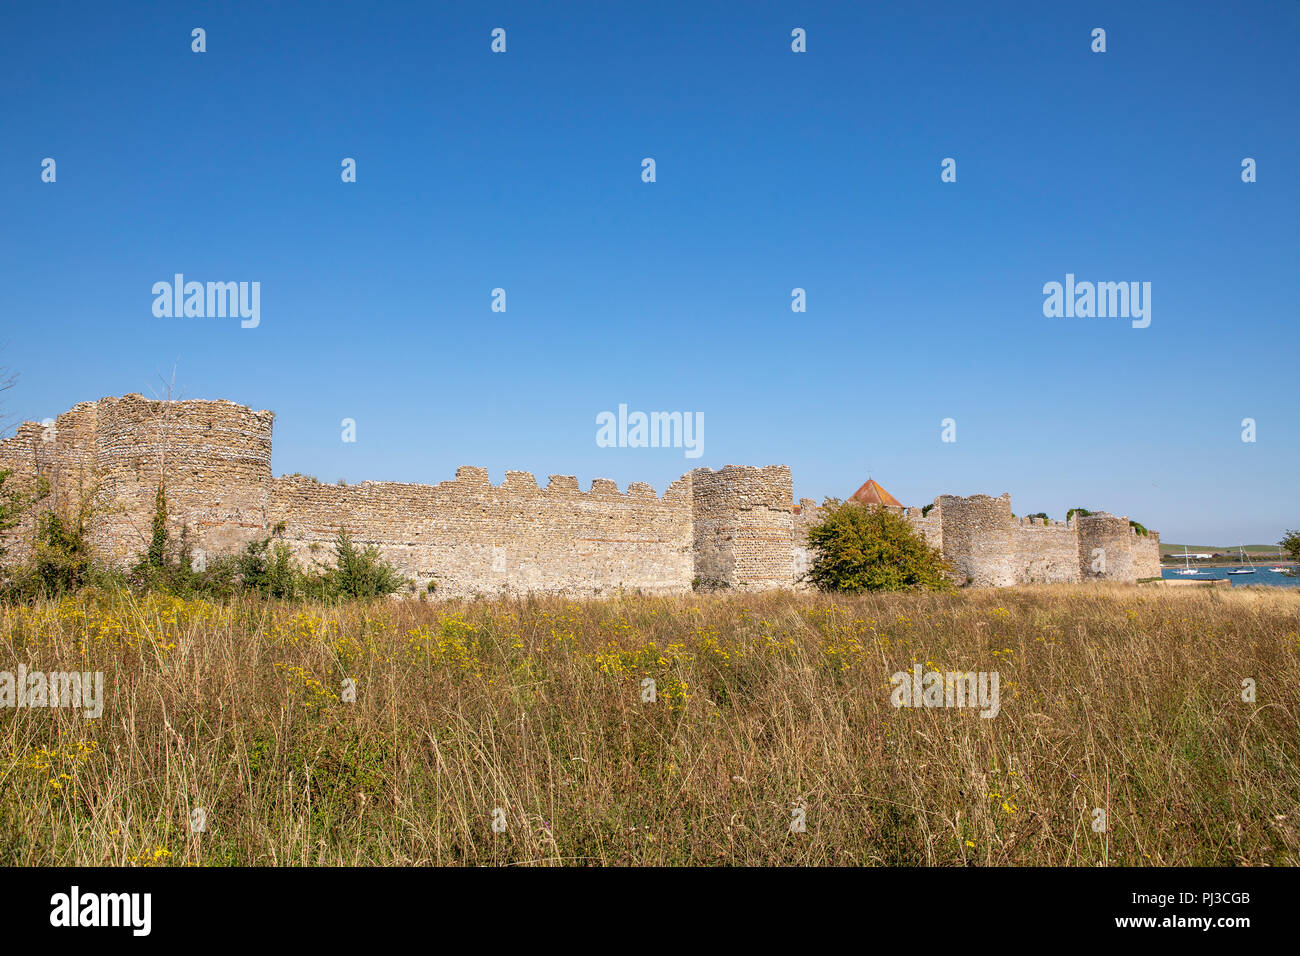 Outside the impressive walls of Portchester Castle near Portsmouth in Hampshire. Clear blue skies above the medieval stronghold. Stock Photo